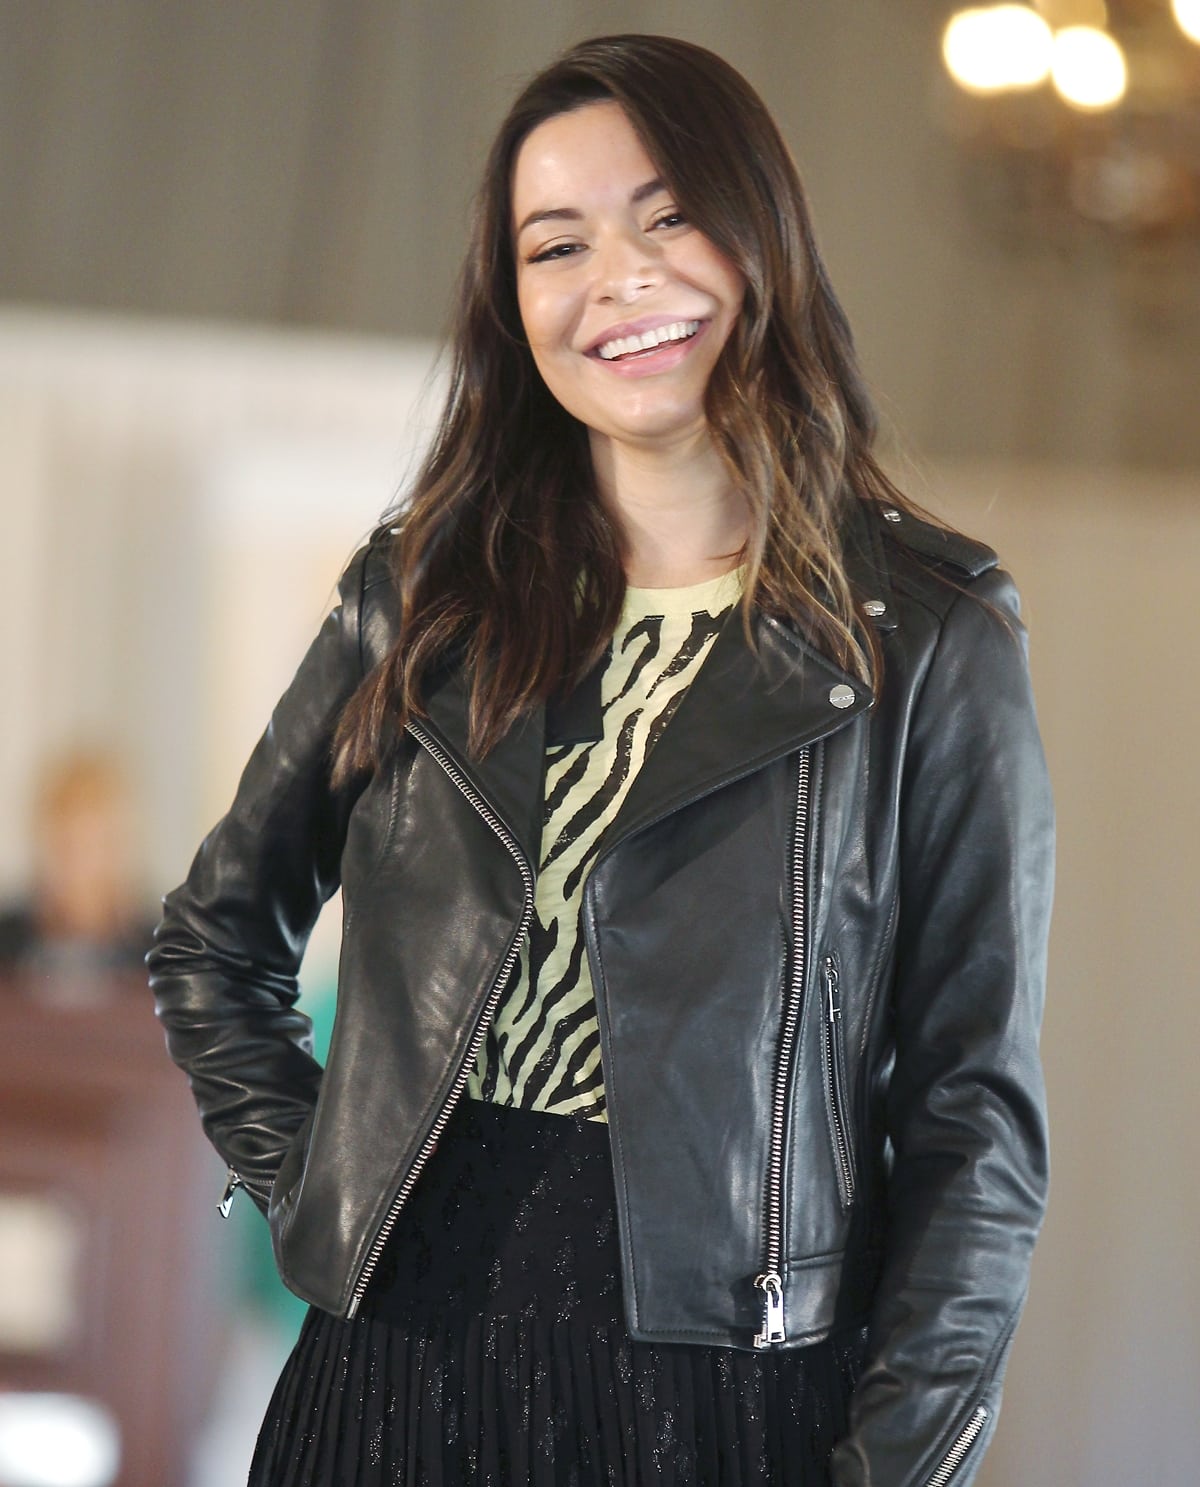 Miranda Taylor Cosgrove made her musical debut in 2008 with a soundtrack album for the series iCarly